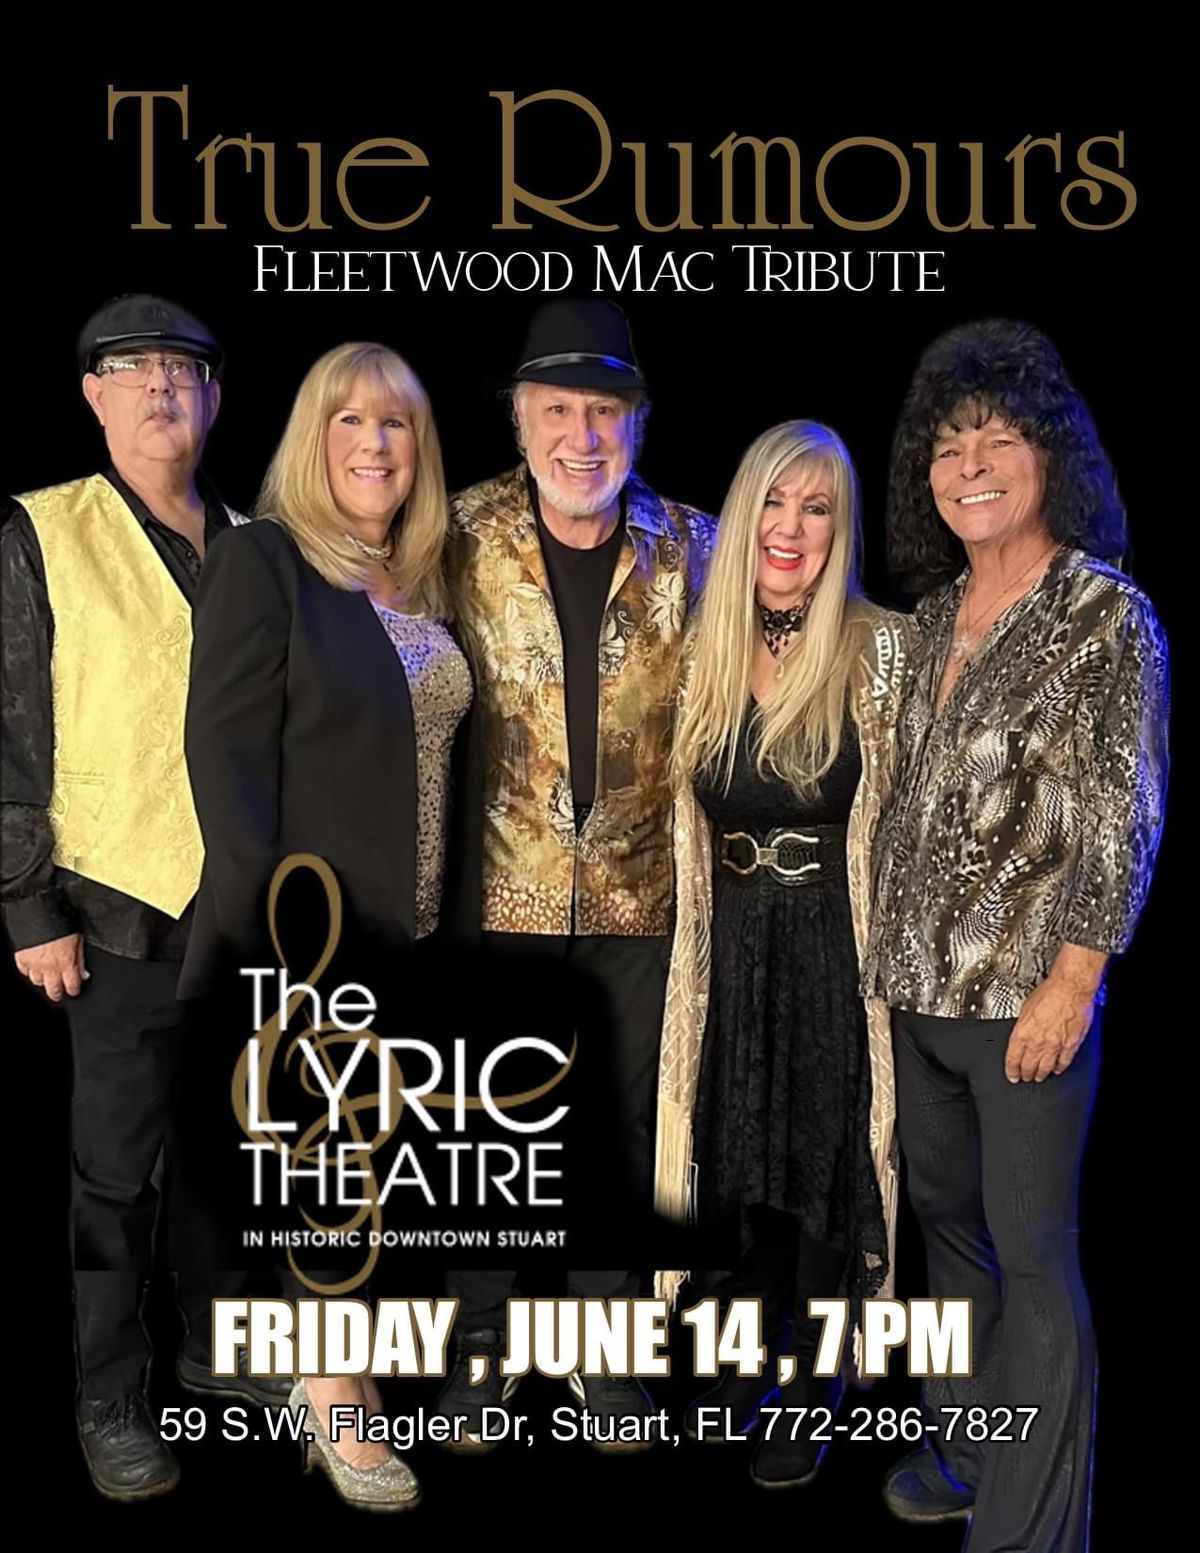 True Rumours...Fleetwood Mac Show at the Lyric Theater